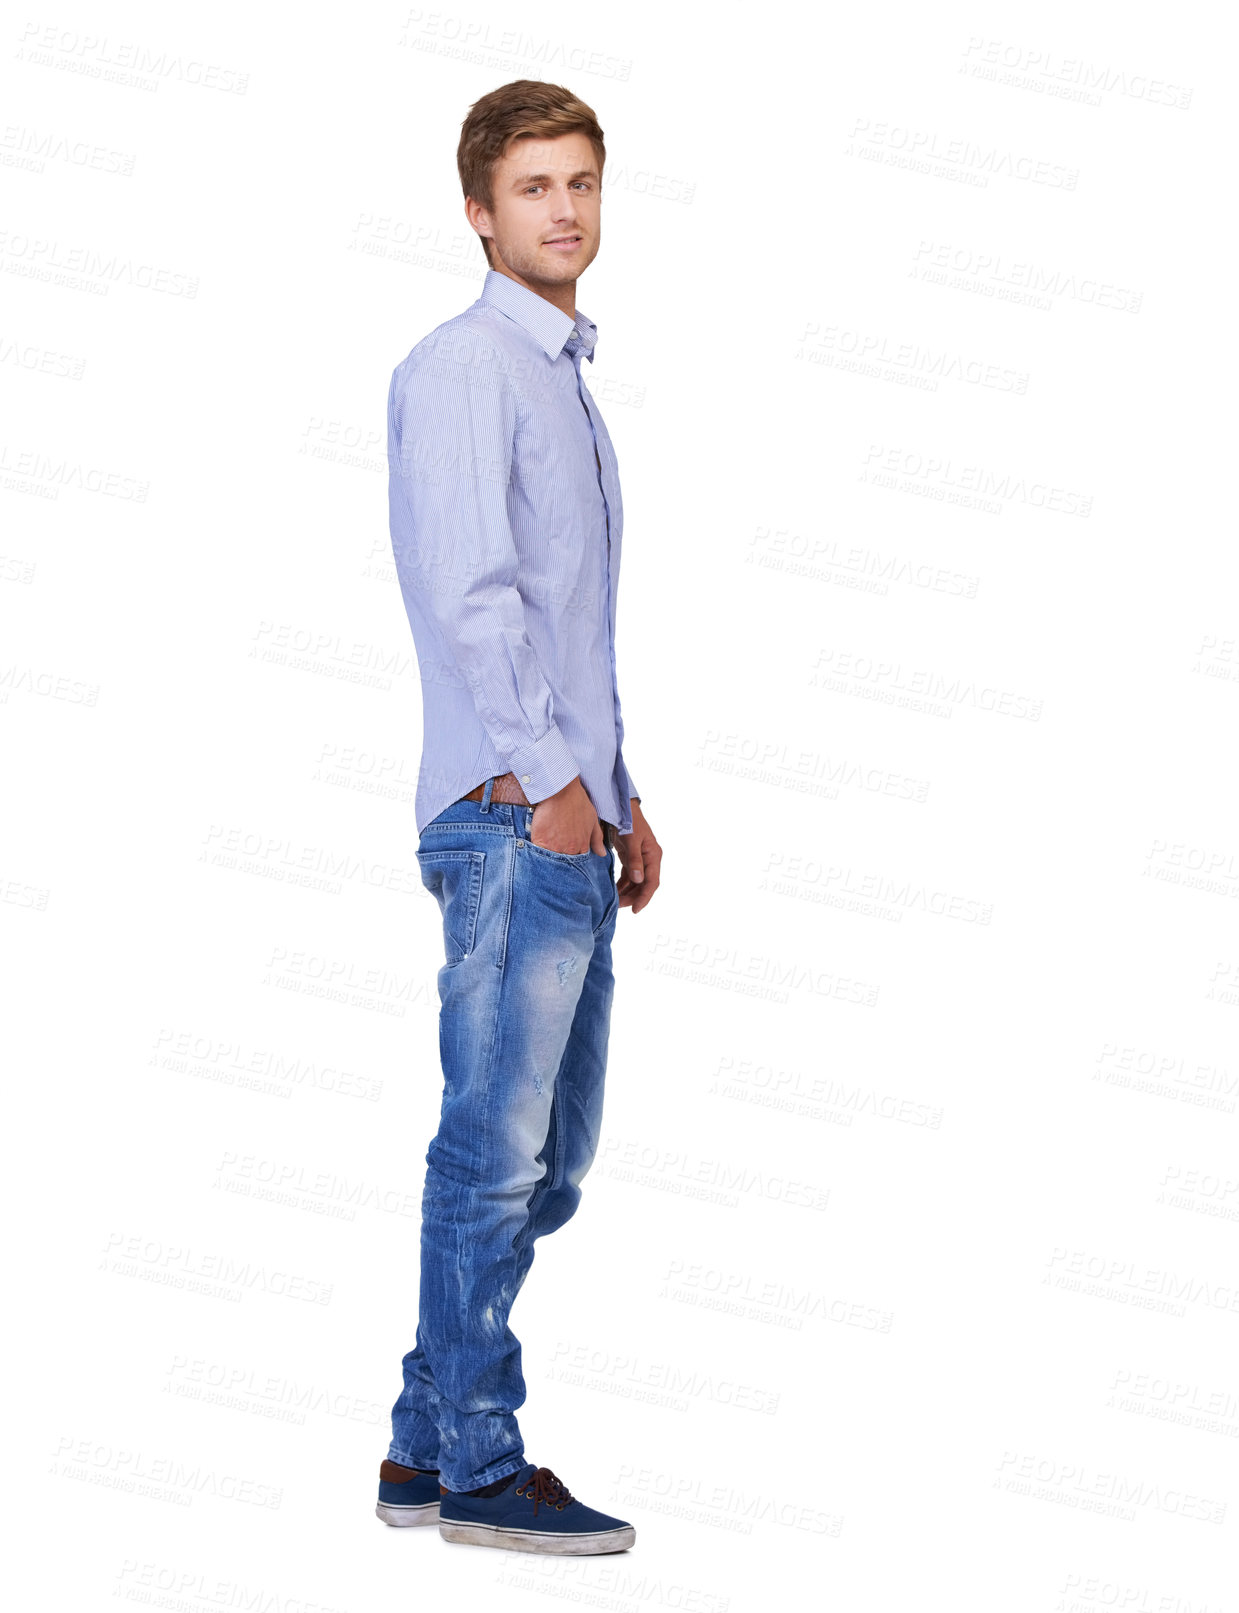 Buy stock photo Fashion, handsome and portrait of man in studio with casual, classy and trendy outfit. Smile, happy and full body of attractive young male model with cool and edgy style isolated by white background.